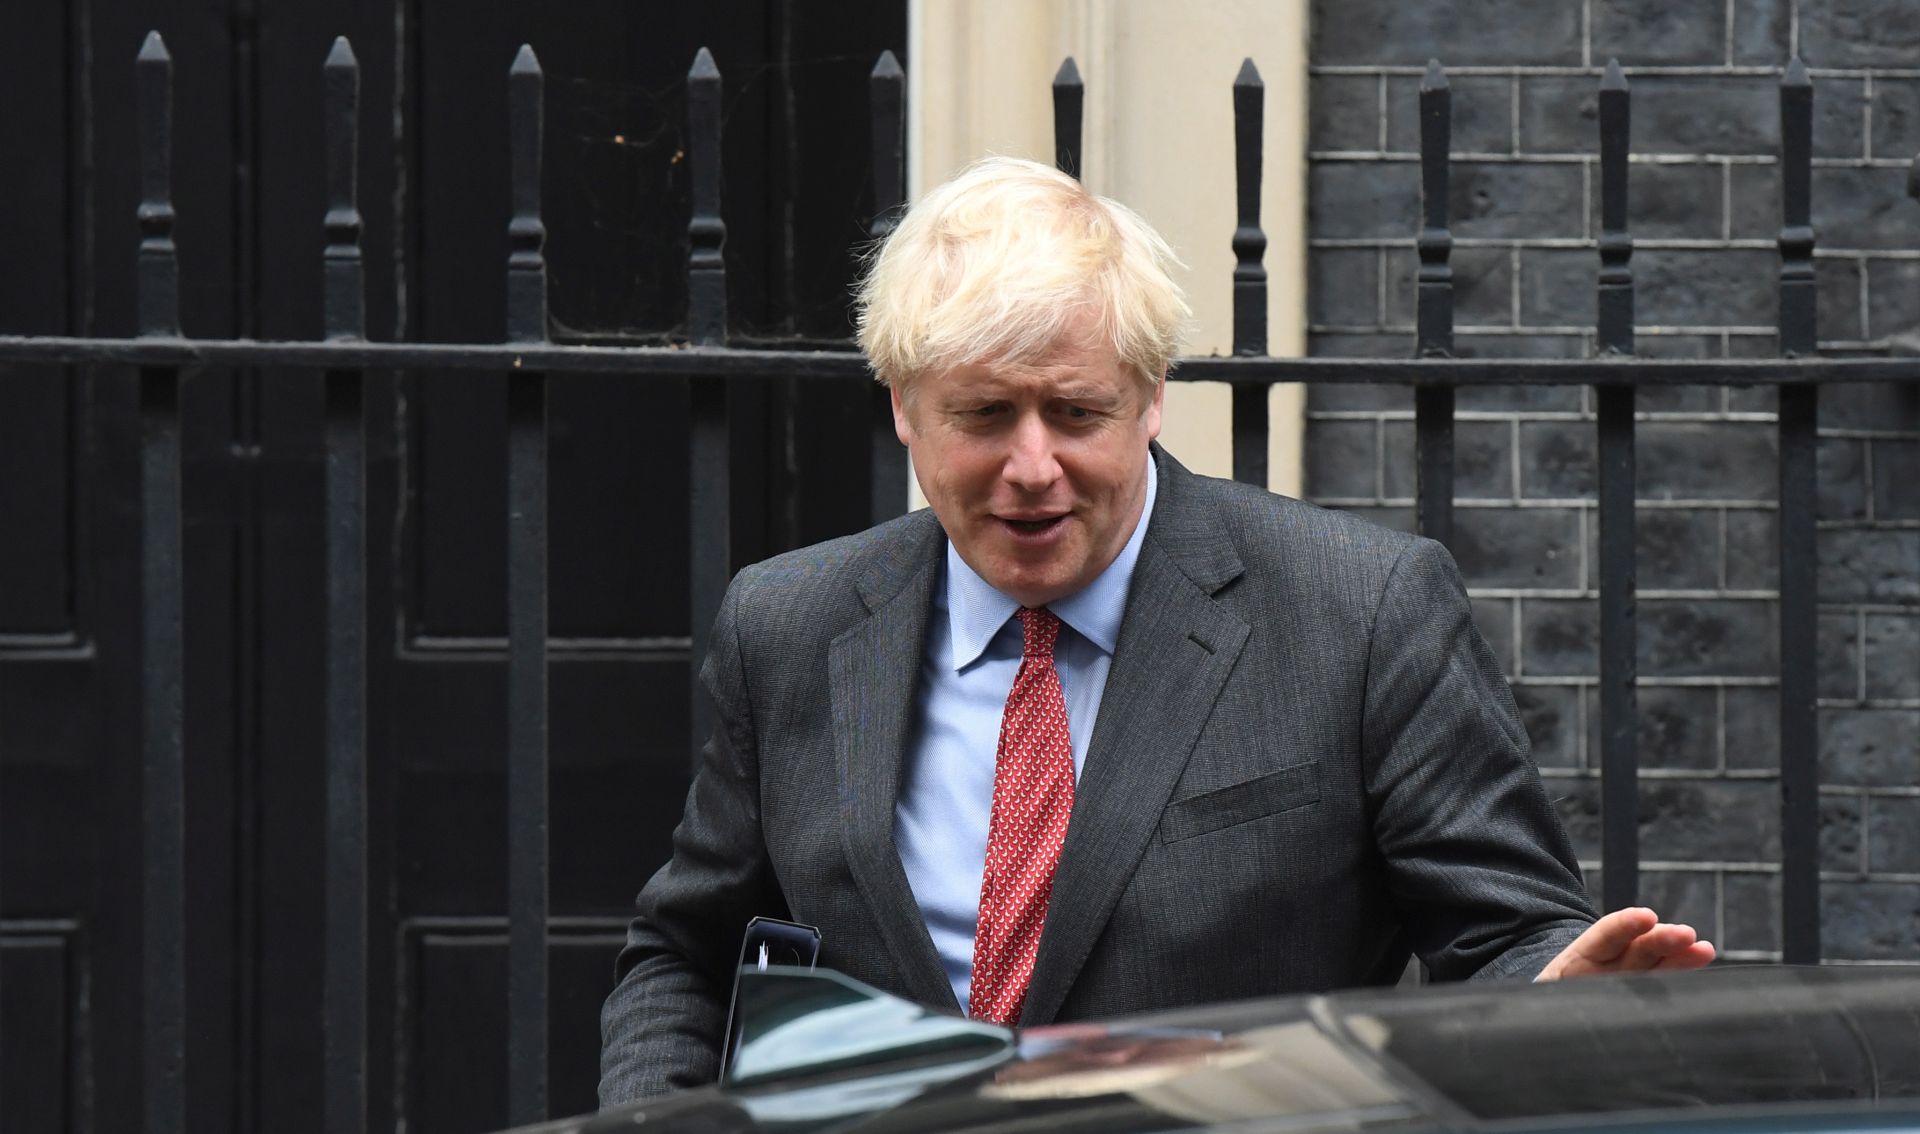 epa08688064 Britain's Prime Minister Boris Johnson departs Downing Street to make a statement in the House of Commons in London, Britain, 22 September 2020. Due to rising cases of coronavirus all pubs, bars, restaurants and other hospitality venues in England must have a 22:00 closing time from 24 September 2020. Further coronavirus restrictions and measures will be set out by the prime minister in the House of Commons on 22 September 2020.  EPA/NEIL HALL